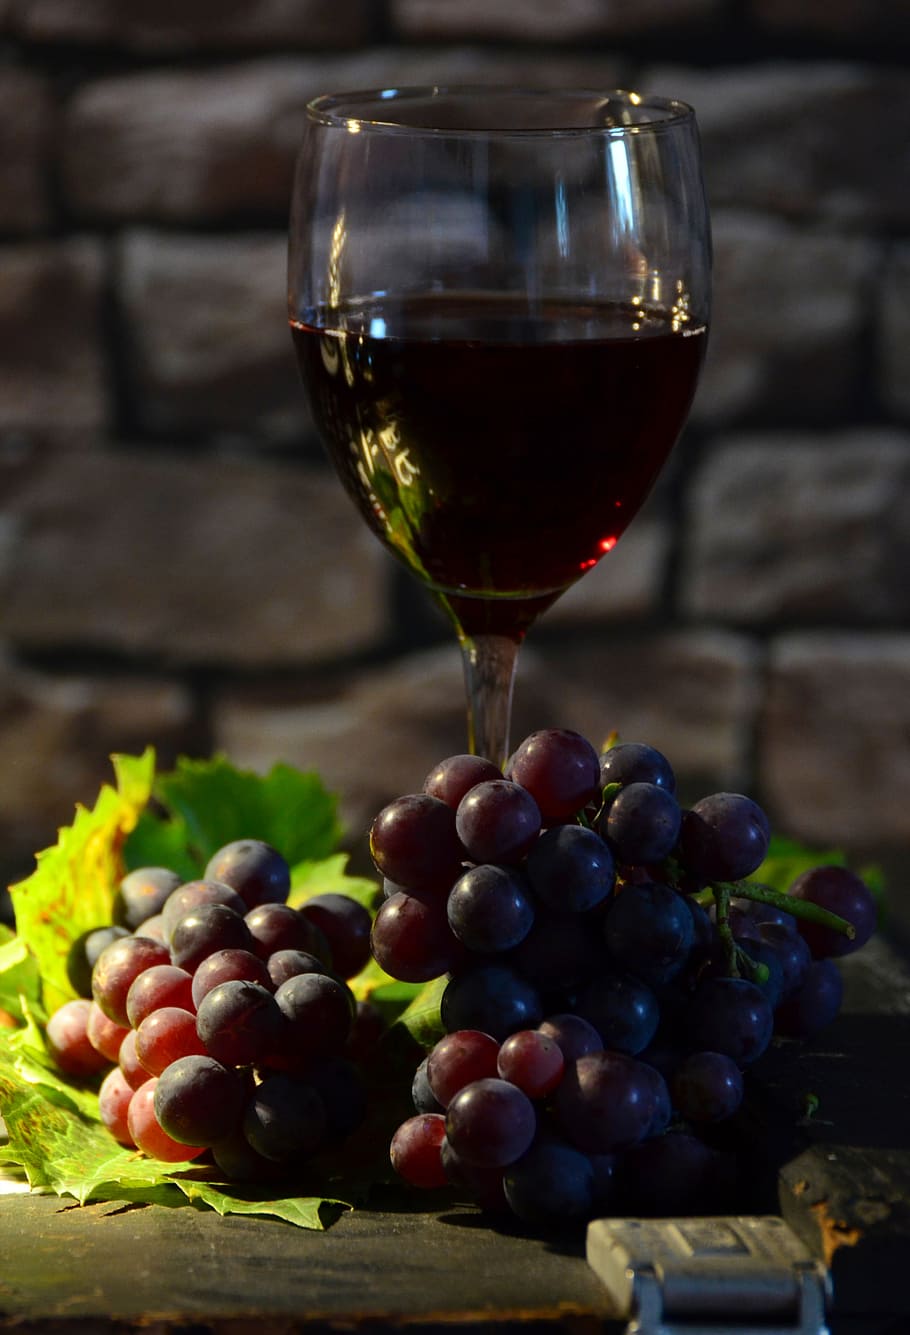 grape wine, clear, goblet glass, wine glass, grapes, wine, red grapes, back light, still life, grapevine